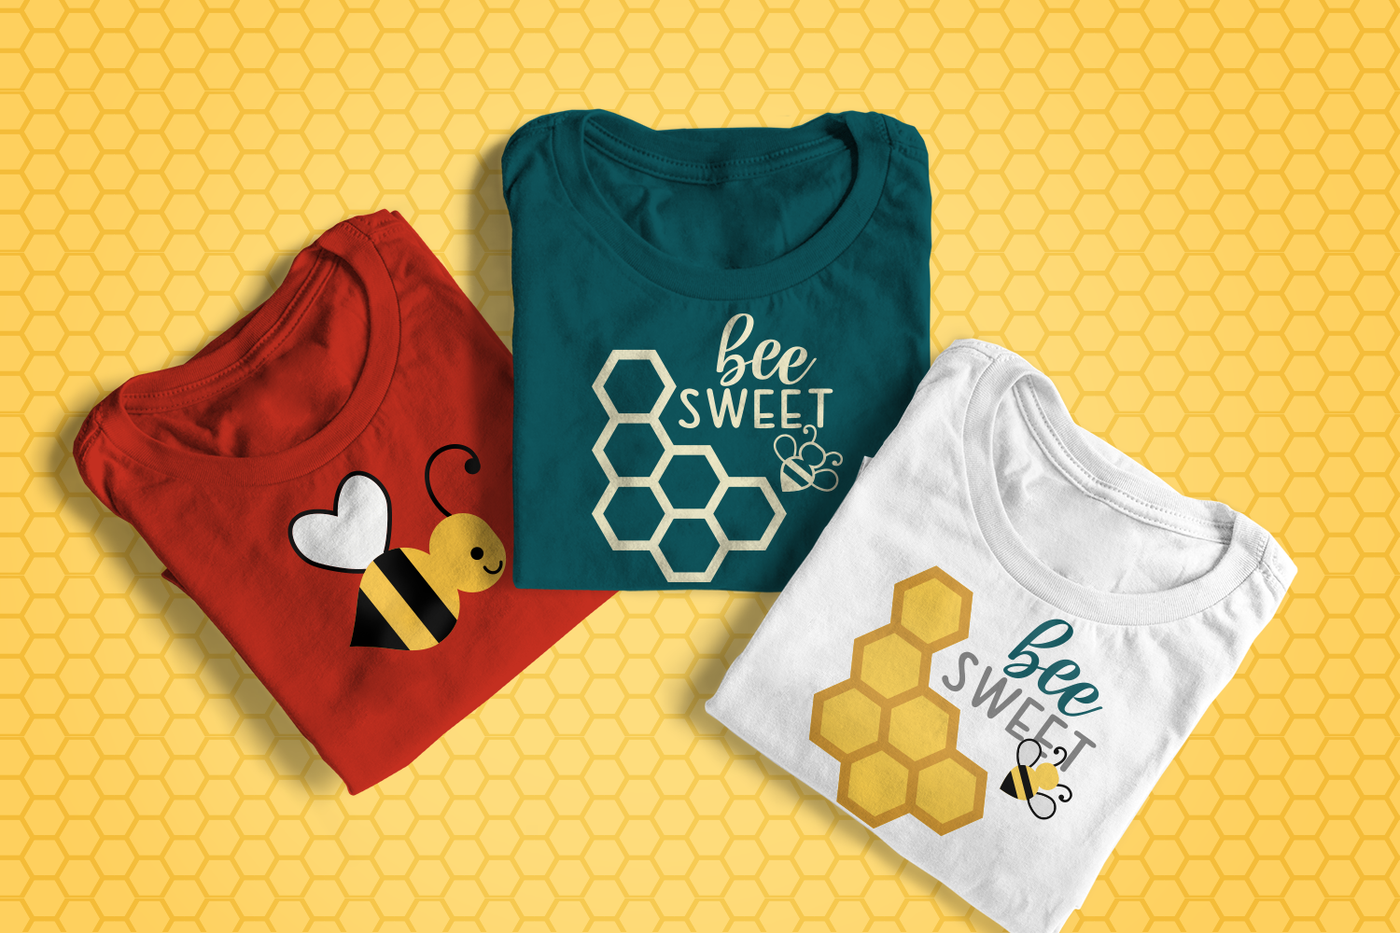 Three folded shirts on a honeycomb pattern background. On shirt has a cartoon smiling bee. The other two shirts have a honeycomb, a simple bee, and the words "bee sweet." One is done as a single color design, the other is done in multiple colors.